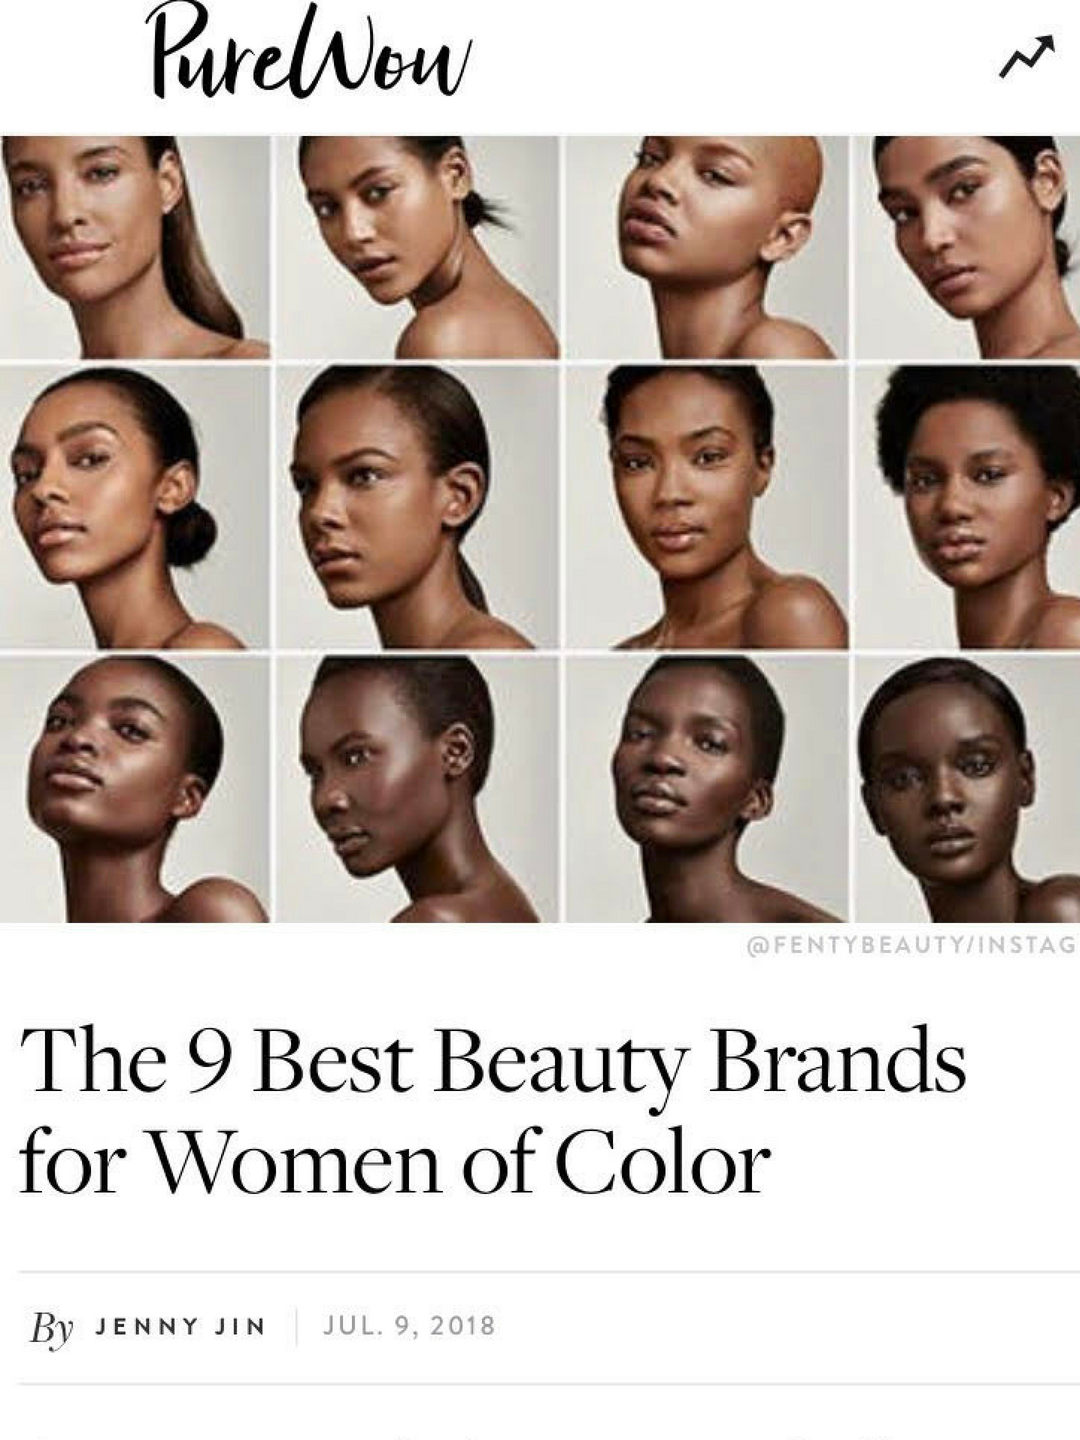 The 9 Best Beauty Brands for Women of Color